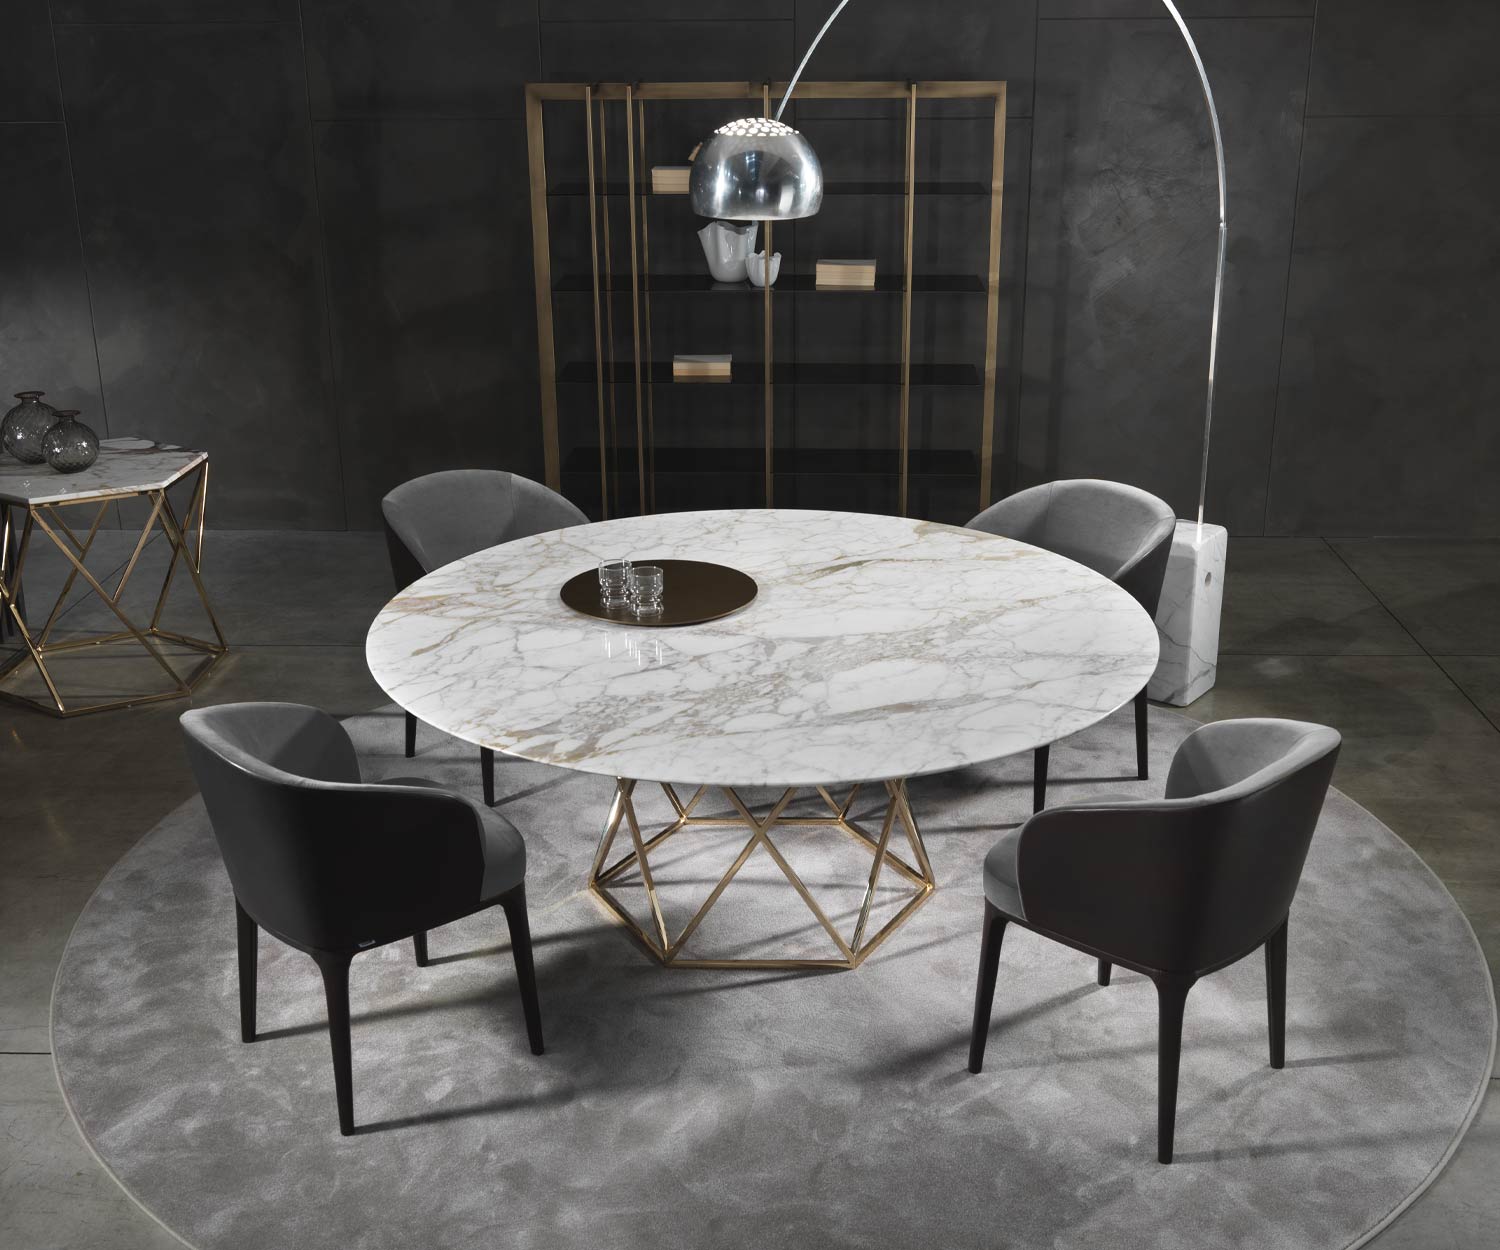 Modern Marelli Designer armchair Paris with dining table in dining room